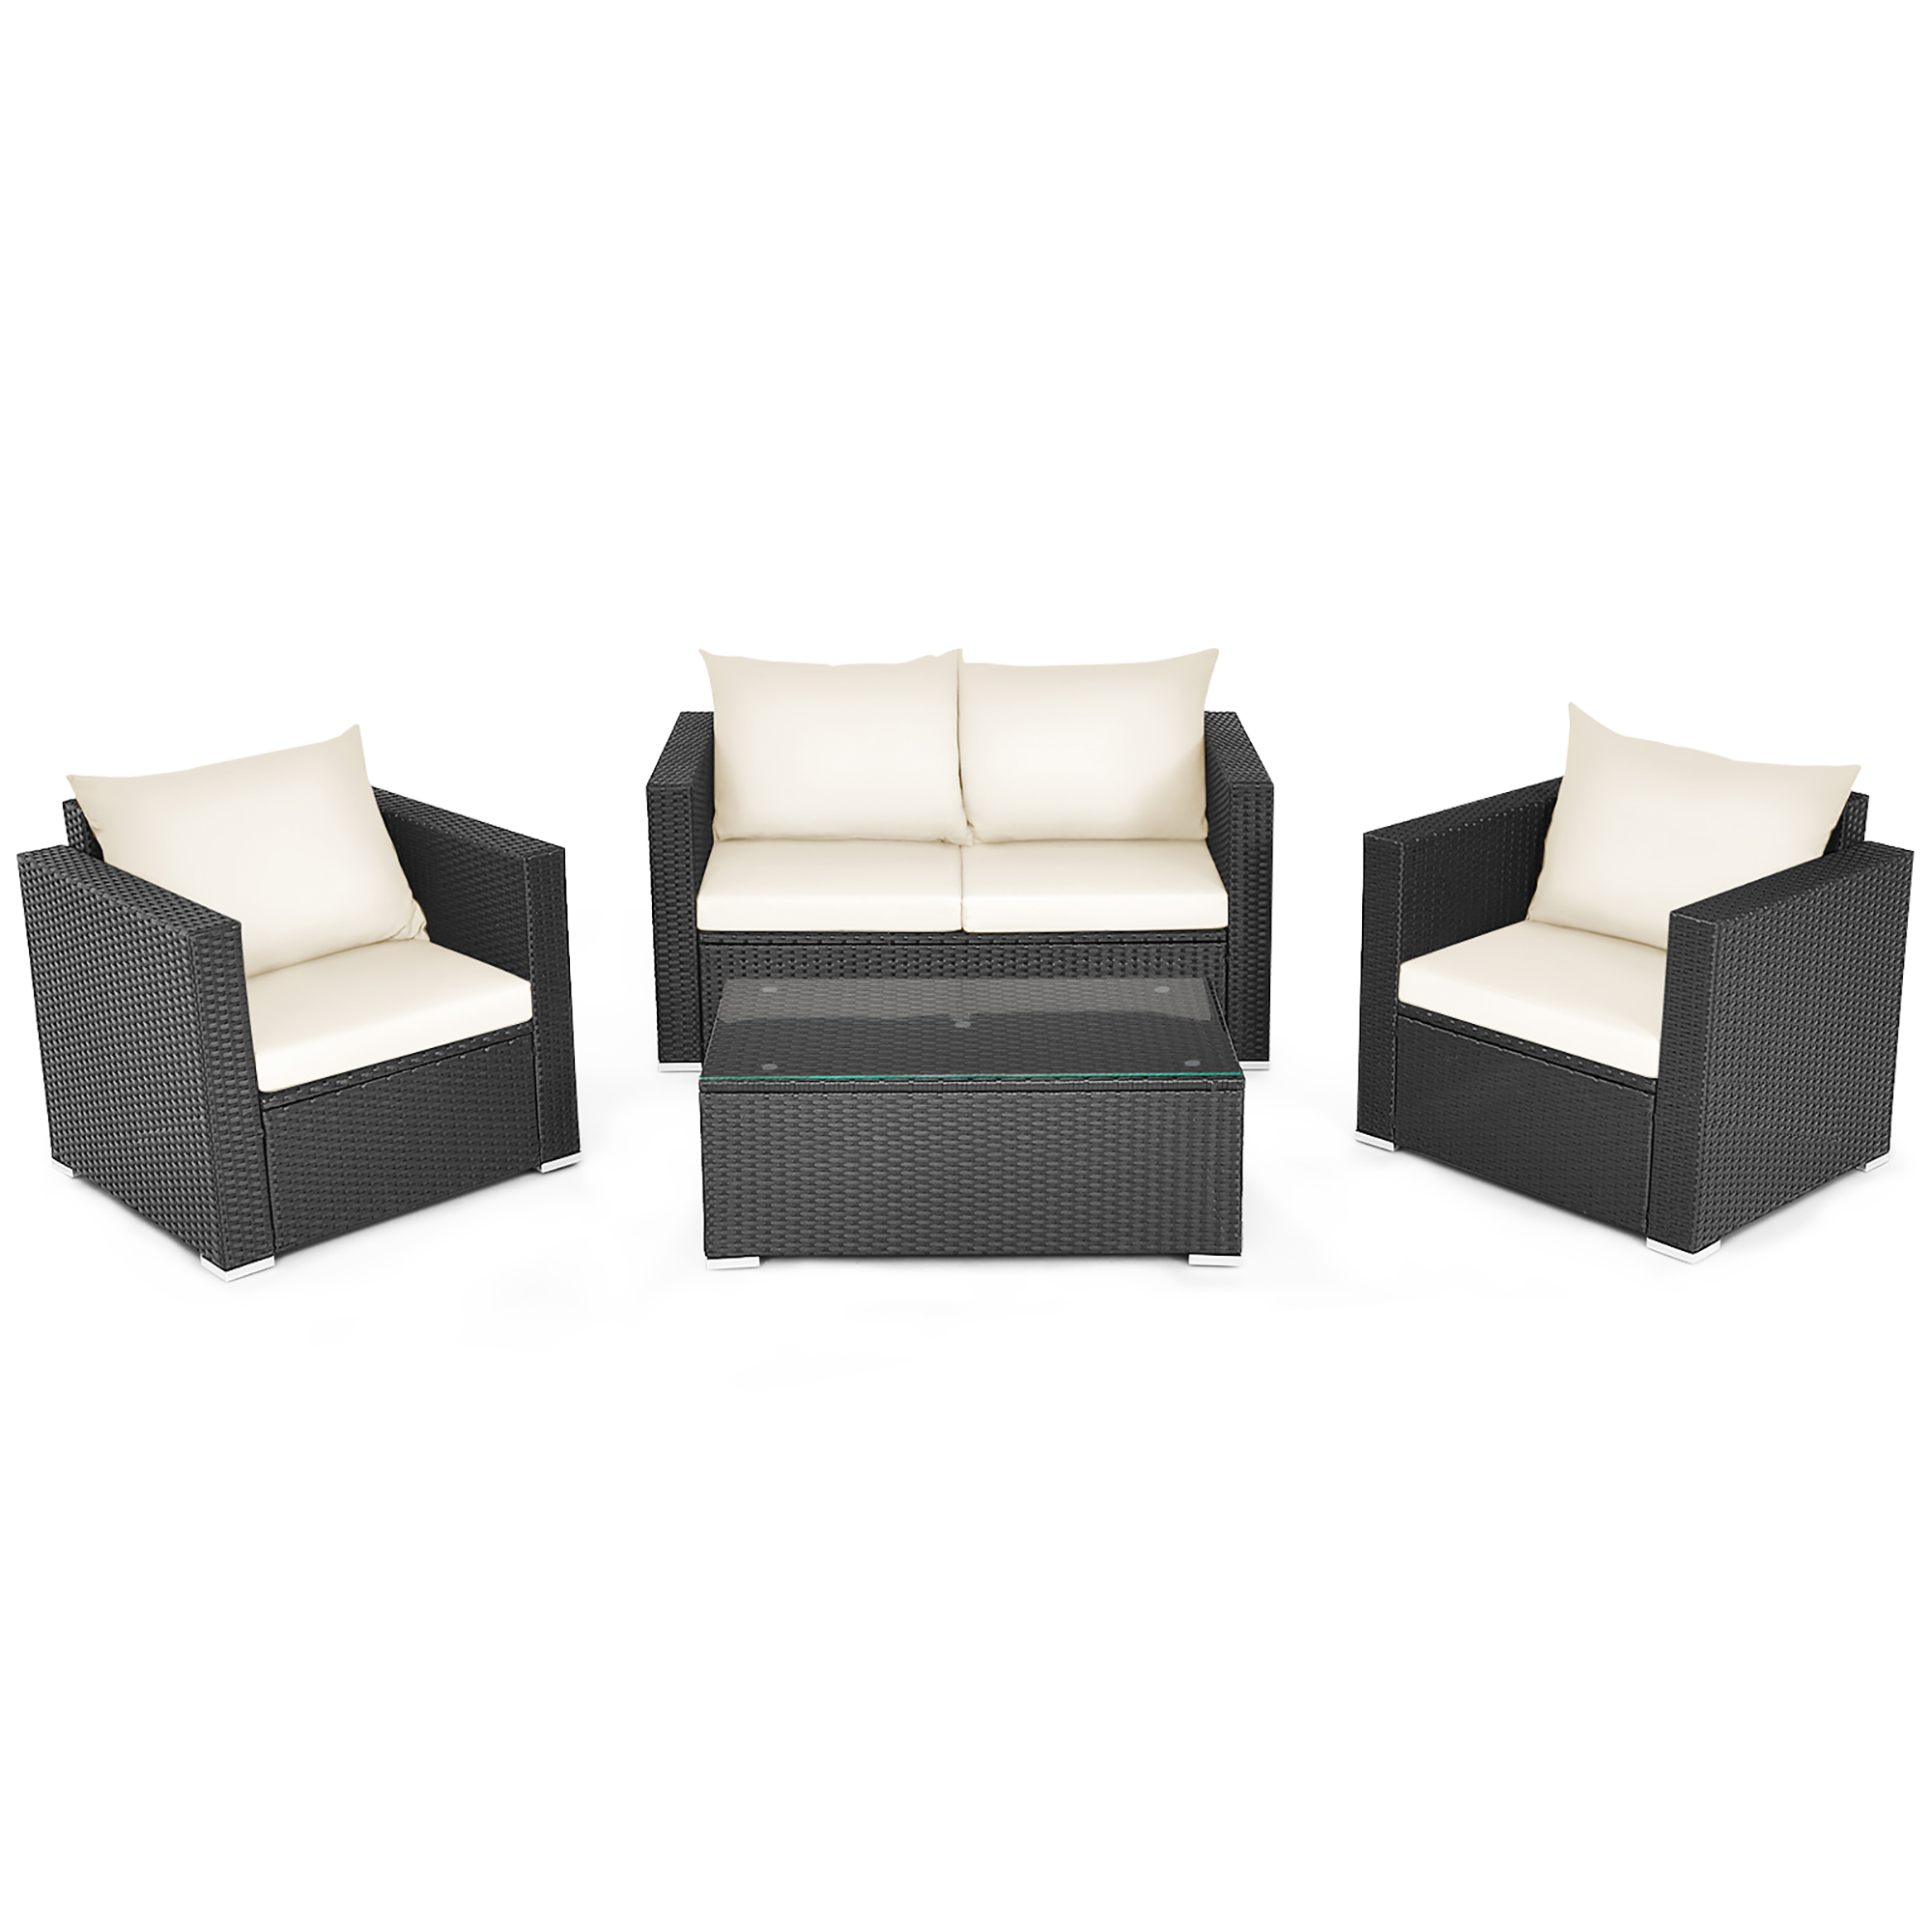 Costway 4PCS Patio Rattan Furniture Set Cushioned Sofa Chair Coffee Table Off White - image 1 of 9